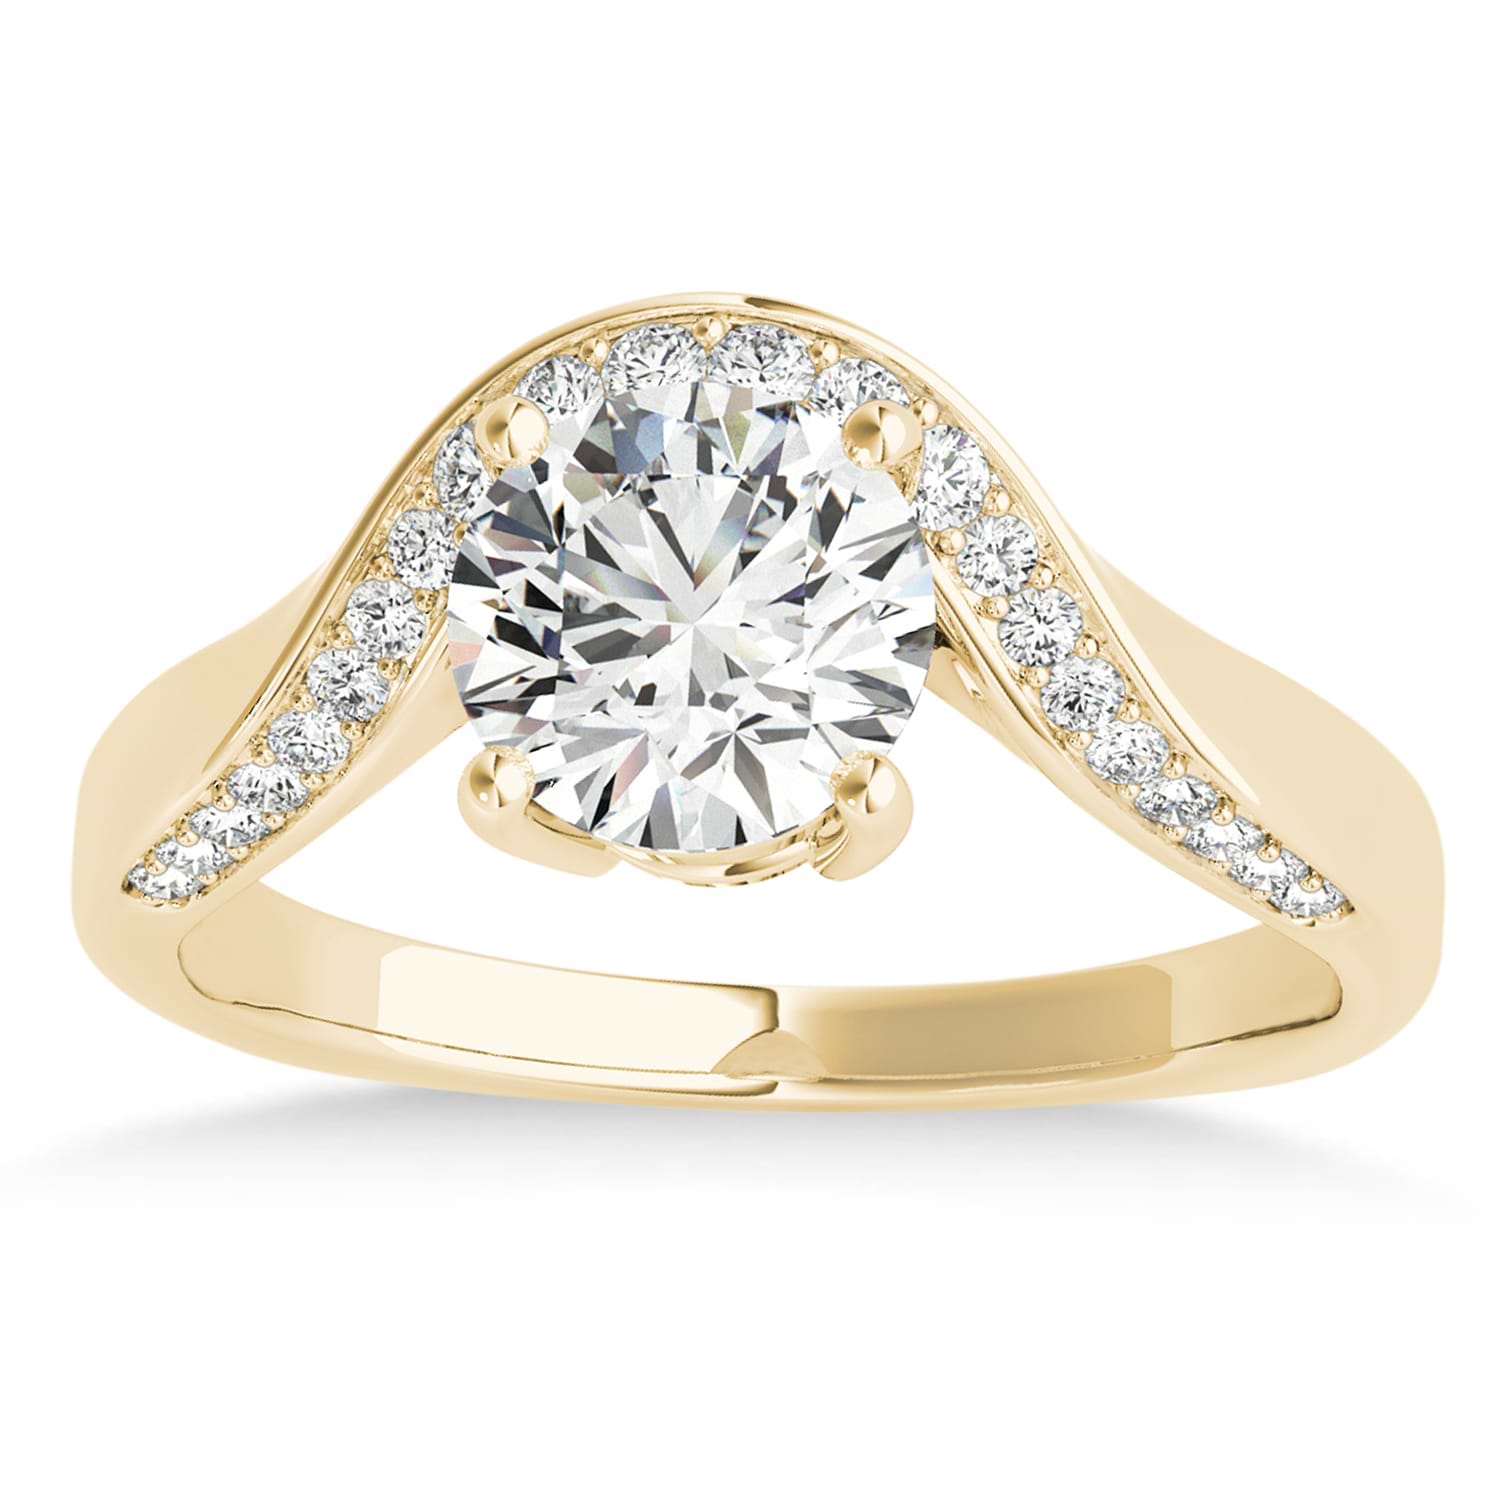 Diamond Euro Shank Curved Engagement Ring in 18k Yellow Gold (0.16ct)